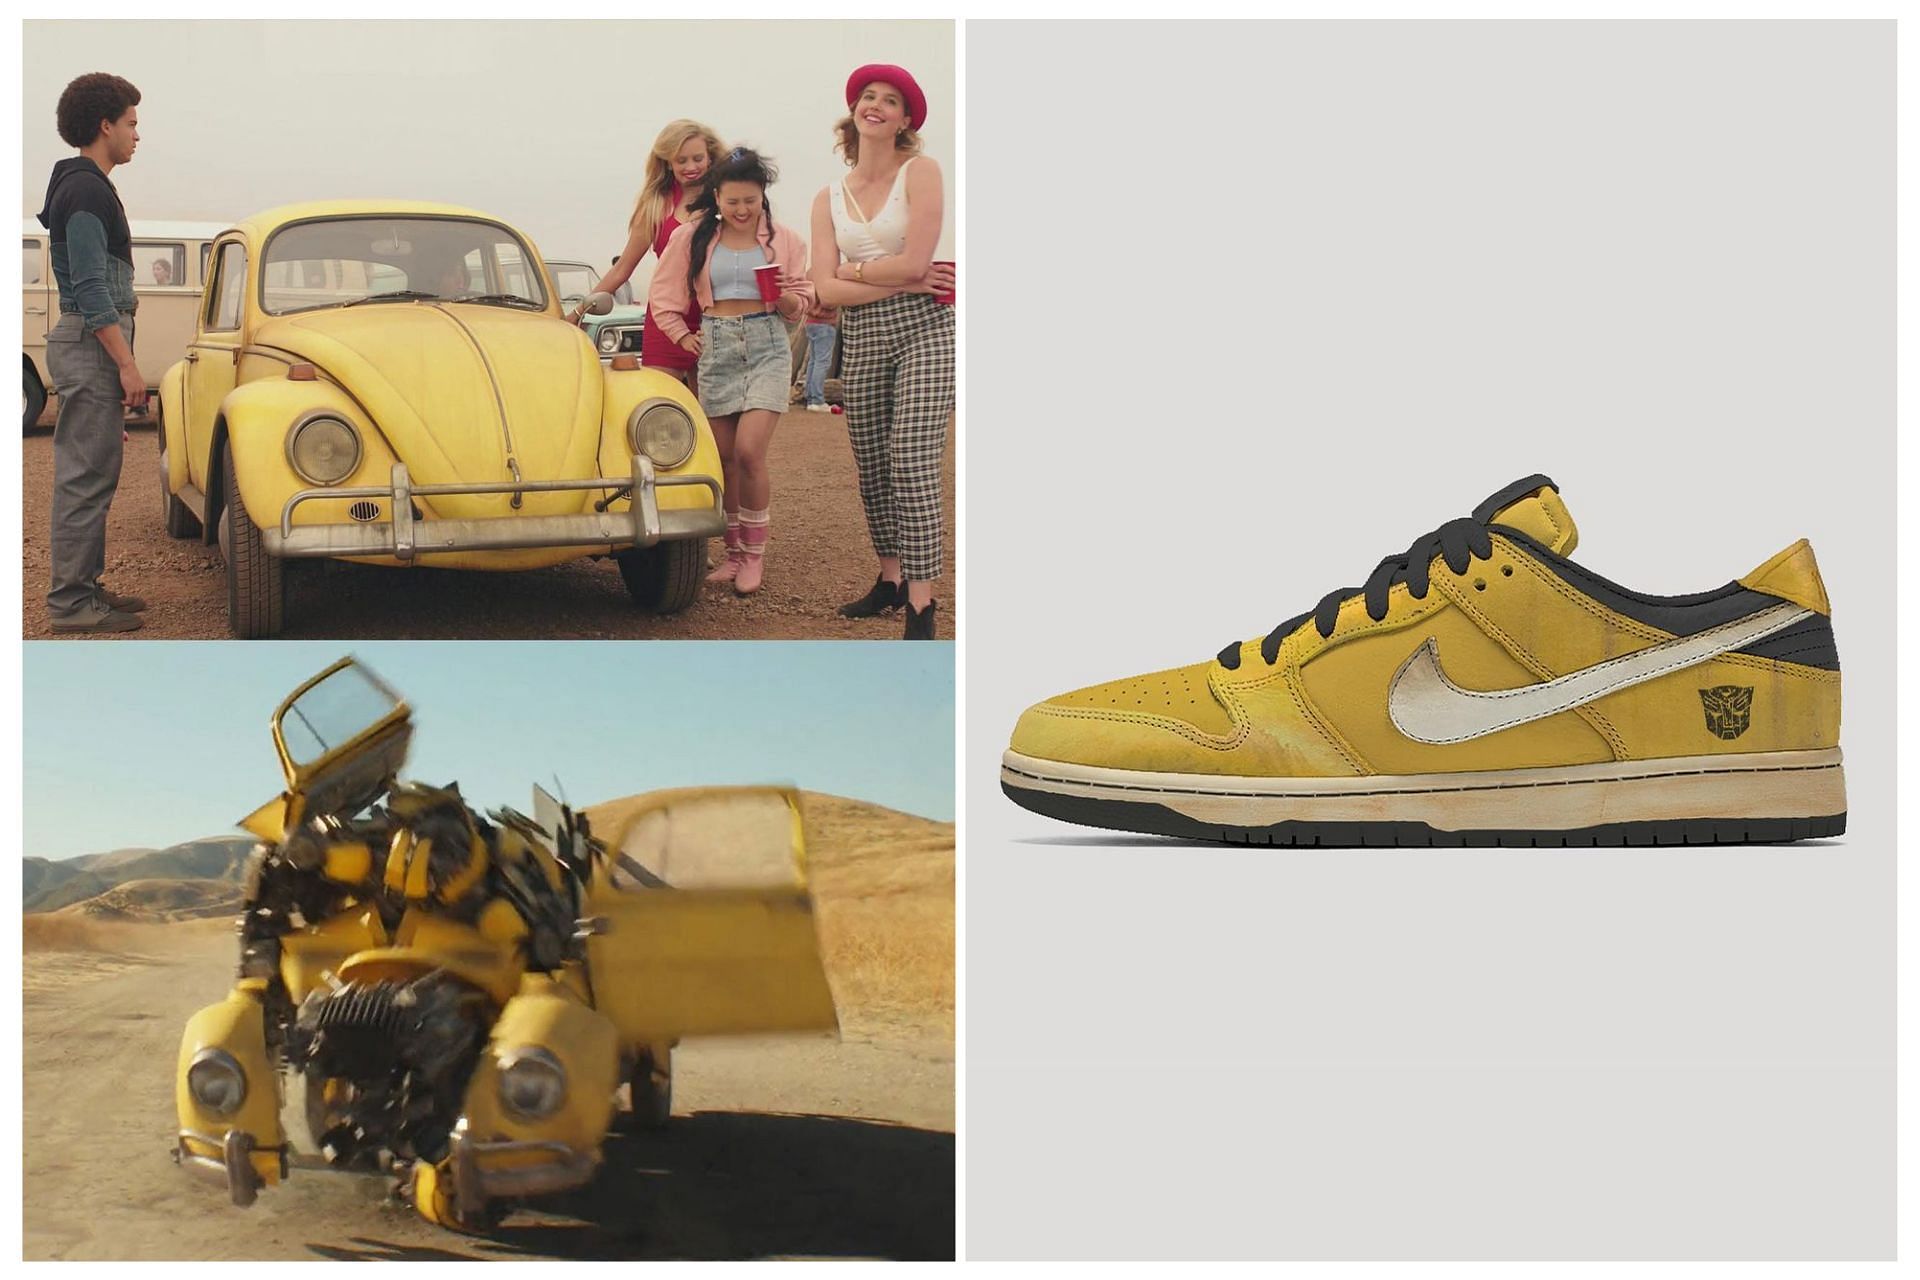 Newly revealed no-brainer* x Nike Dunk Low Bumblebee sneakers inspired by the Volkswagen Beetle (Image via @nobrainer.psd / Instagram)